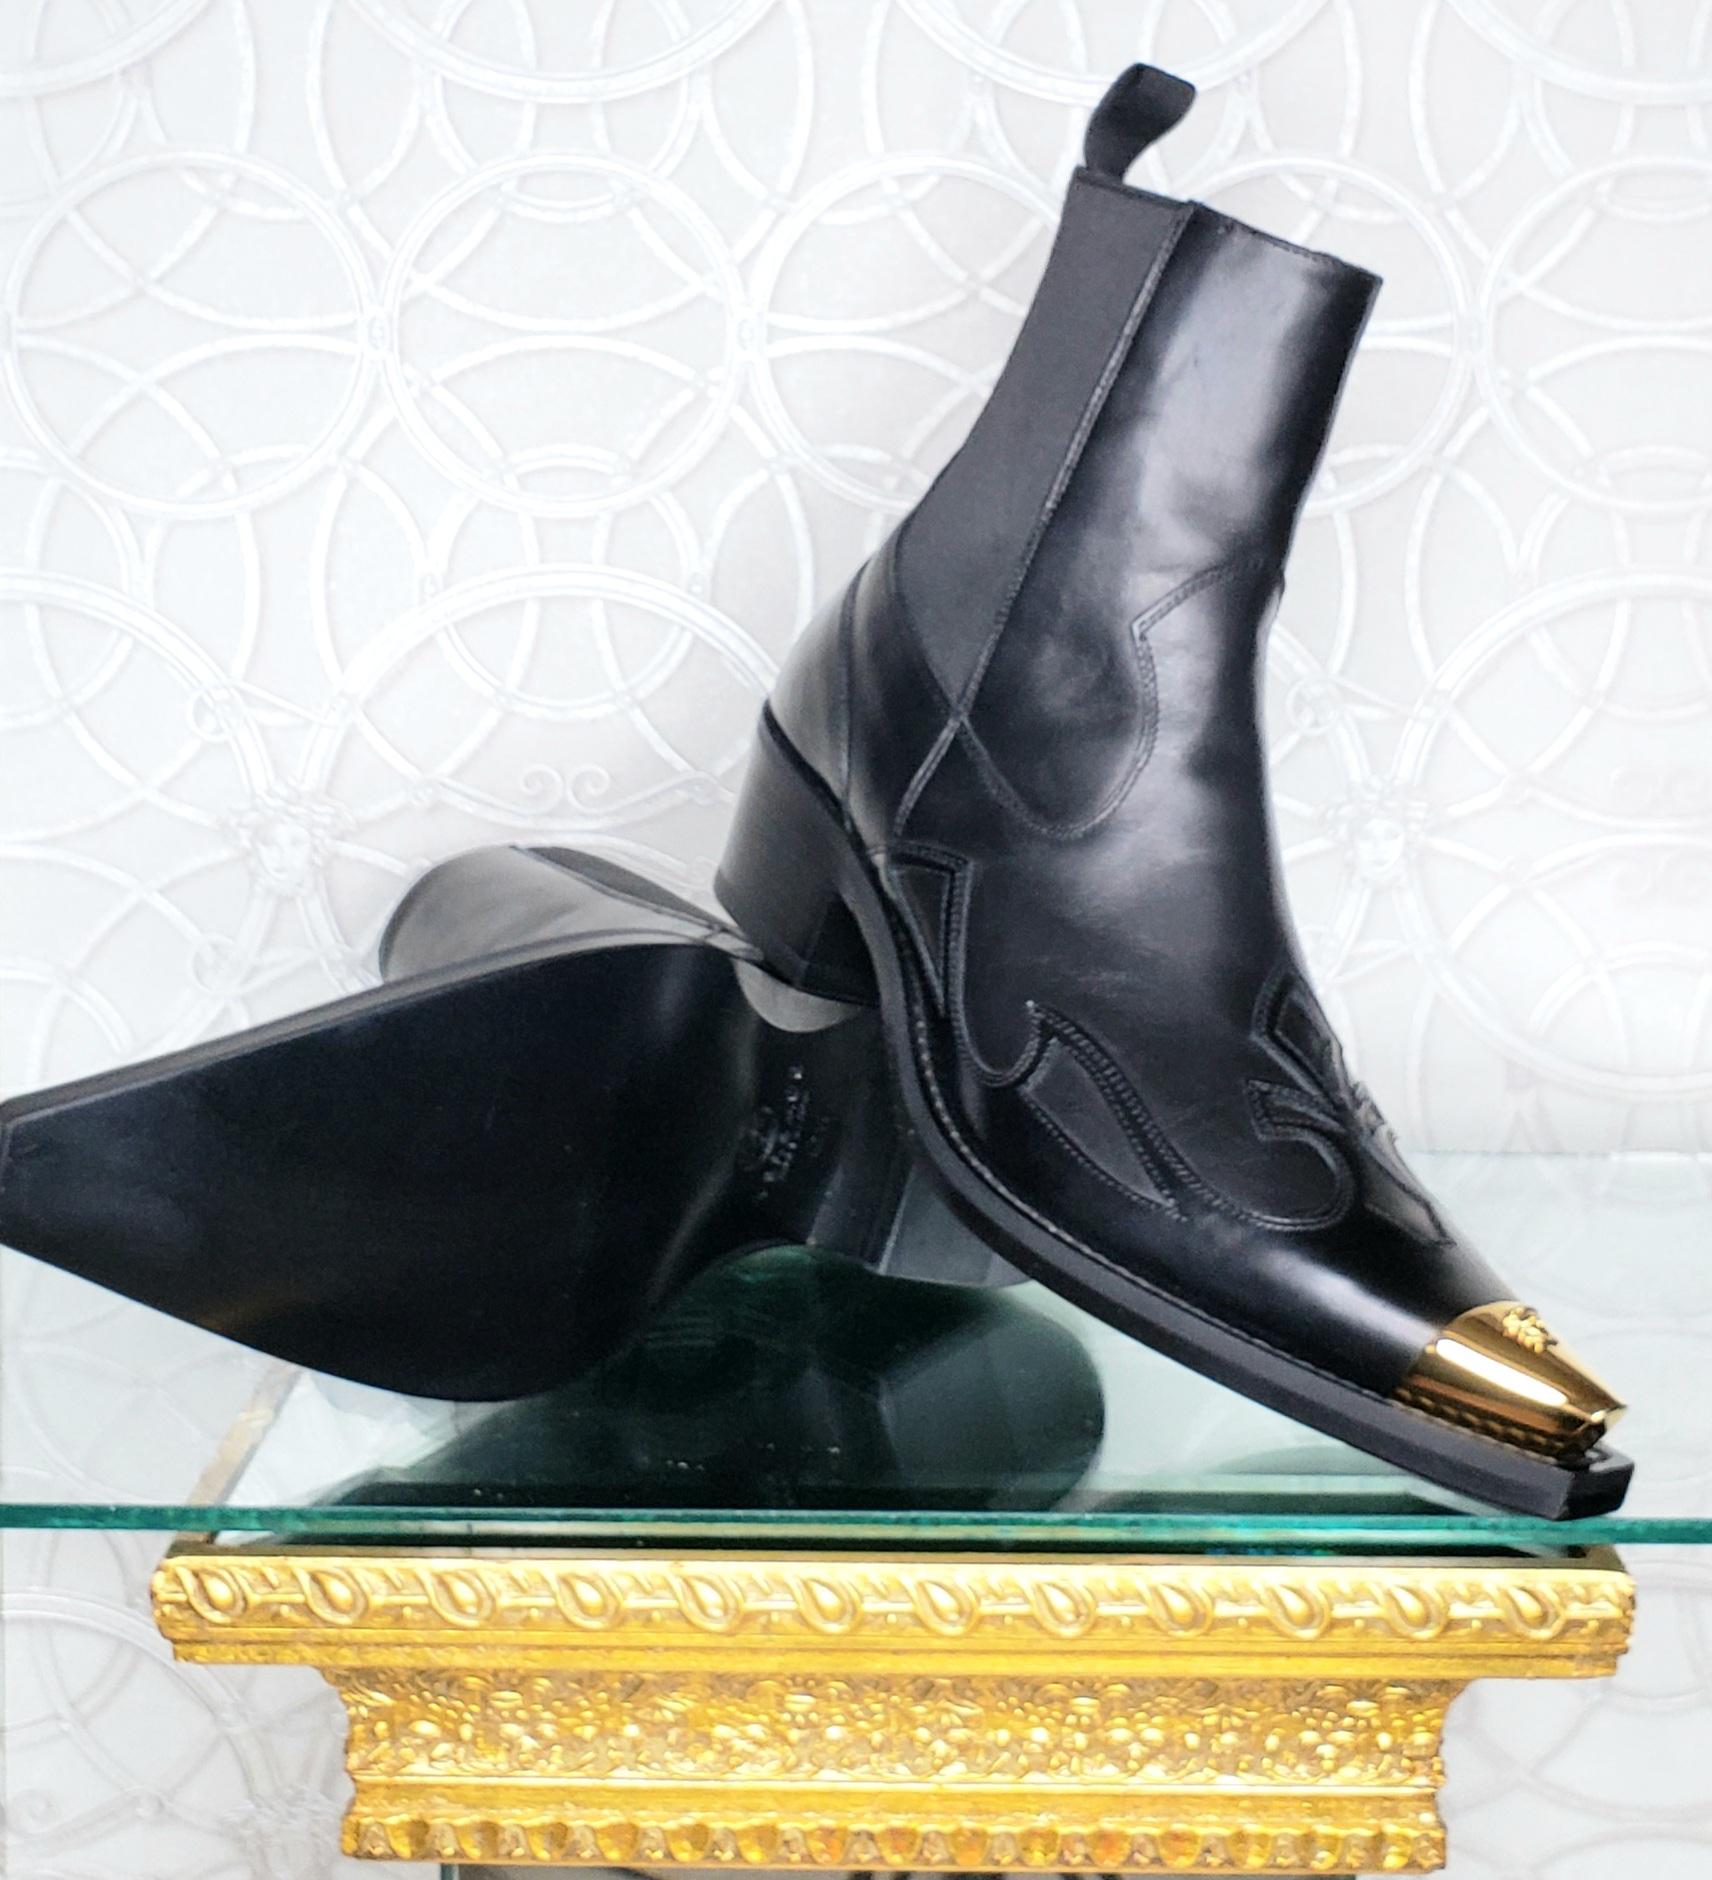 Women's or Men's VERSACE GOTHIC SIGNS 24k GOLD PLATED MEDUSA TIPS BLACK LEATHER BOOTS 40.5 - 7.5